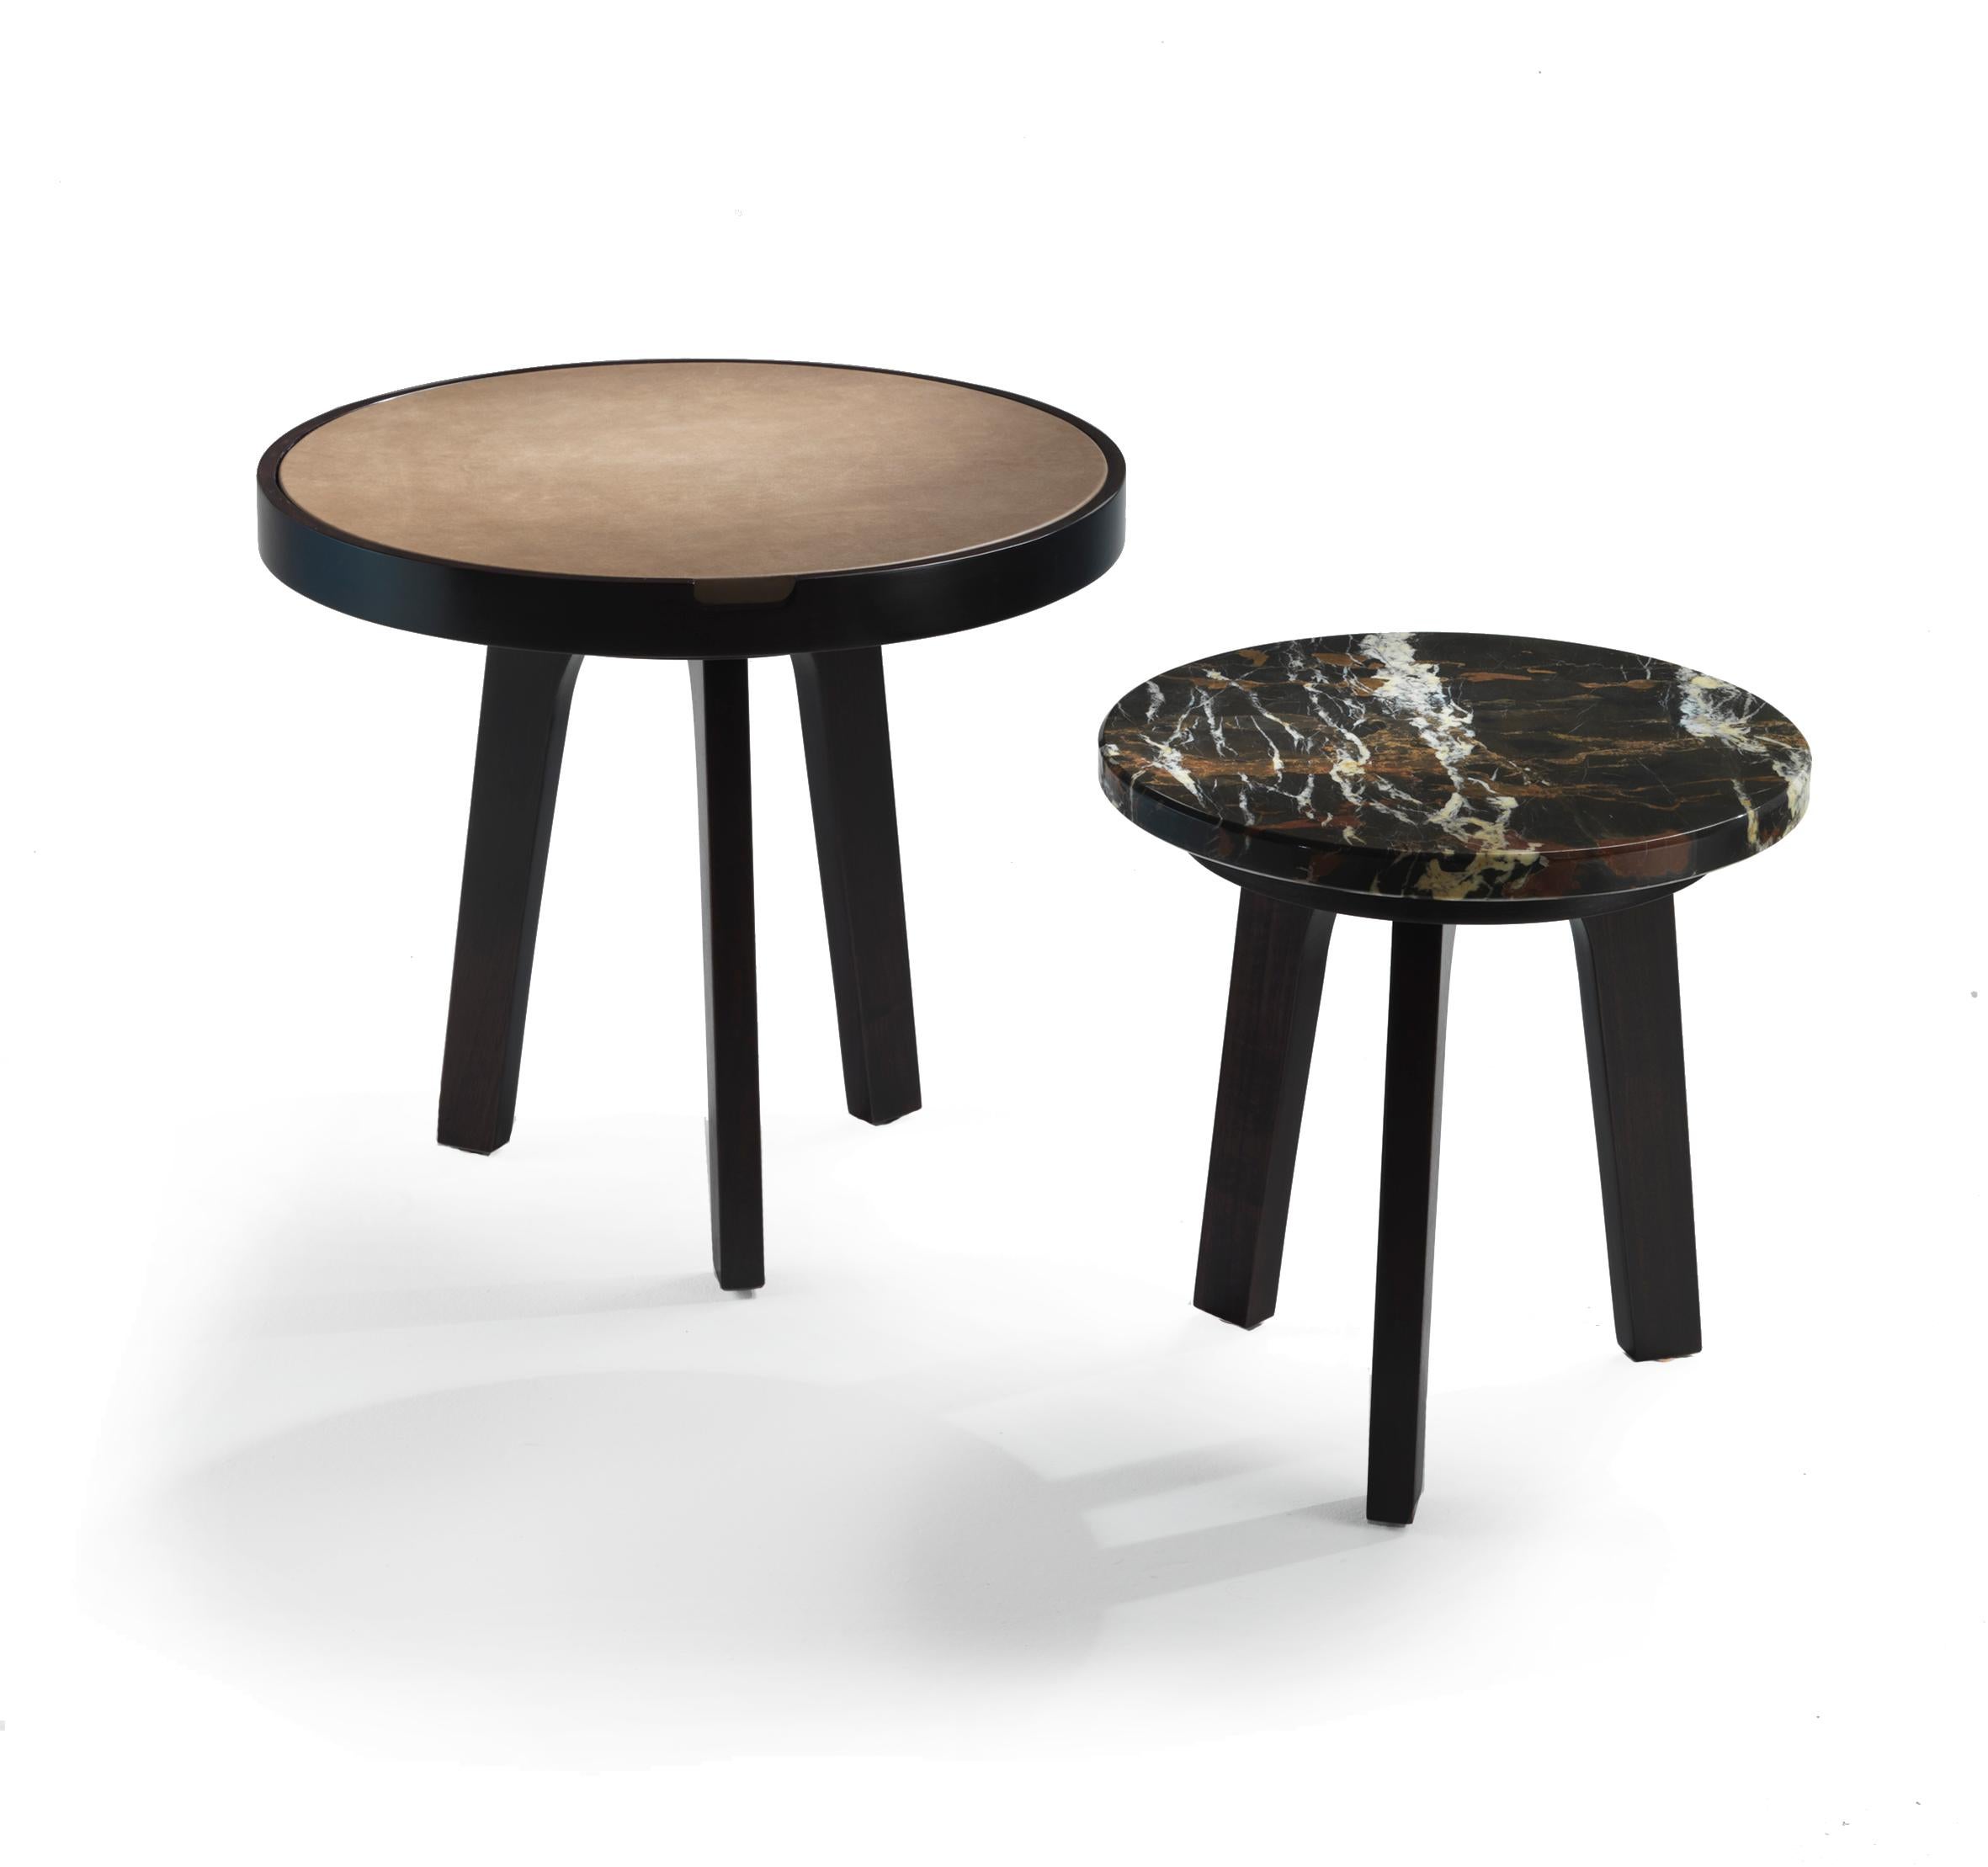 Ink, designed by Archer Humphryes Architects is a cocktail table with a polished yet decorative style, ideal for any living room environment and capable of standing alongside various seats: from the most classic to the most extravagant.

It is